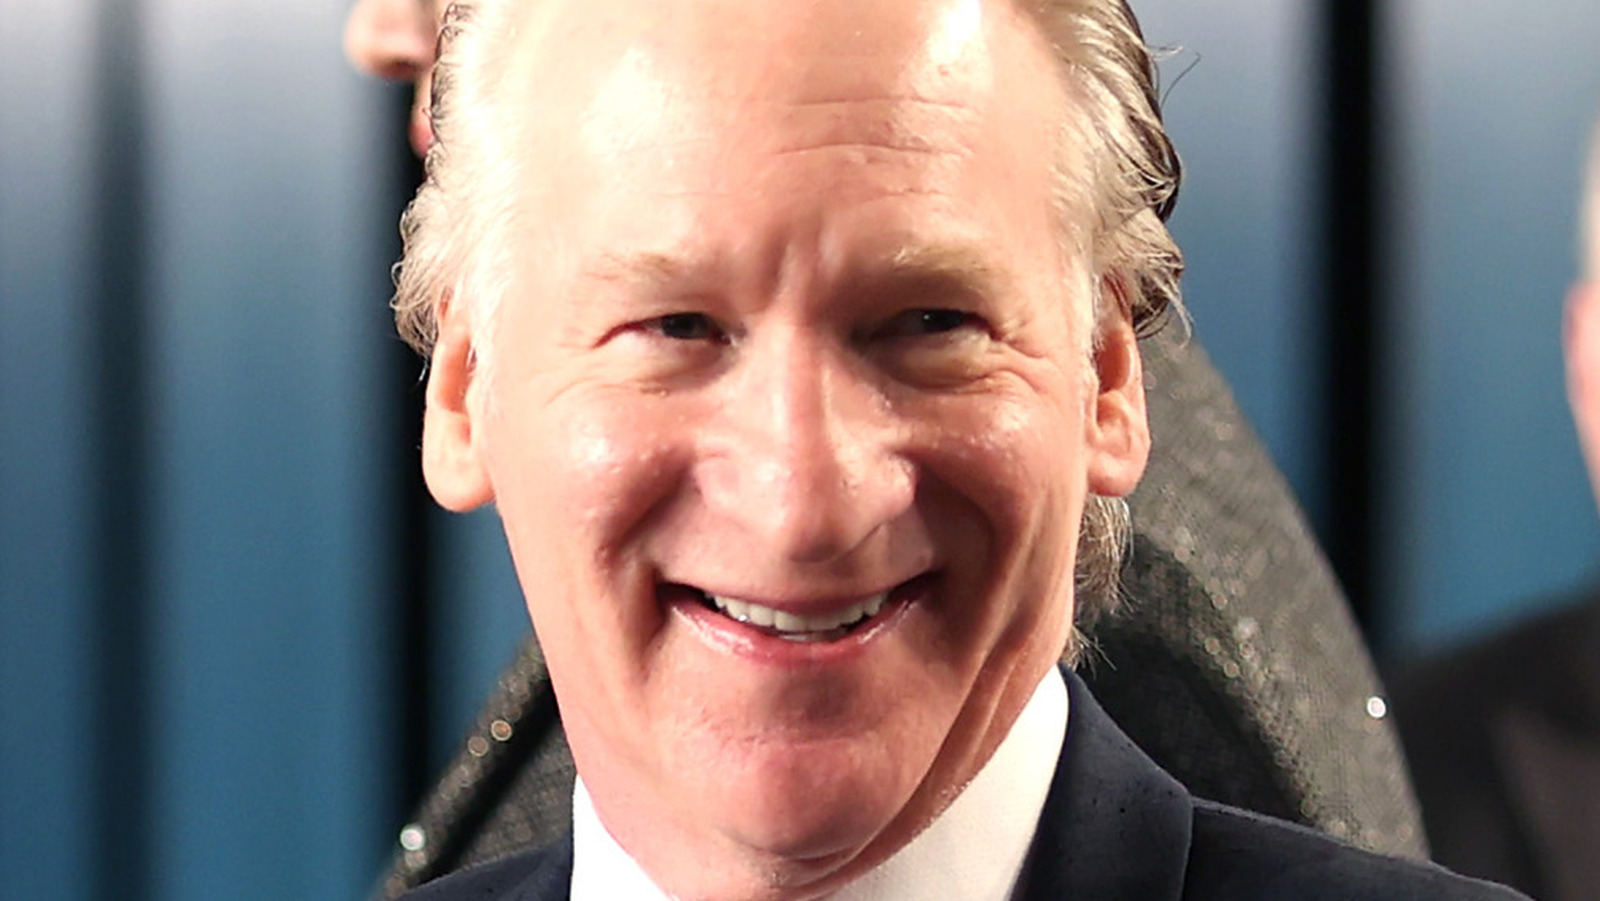 What Is Bill Maher's Net Worth?